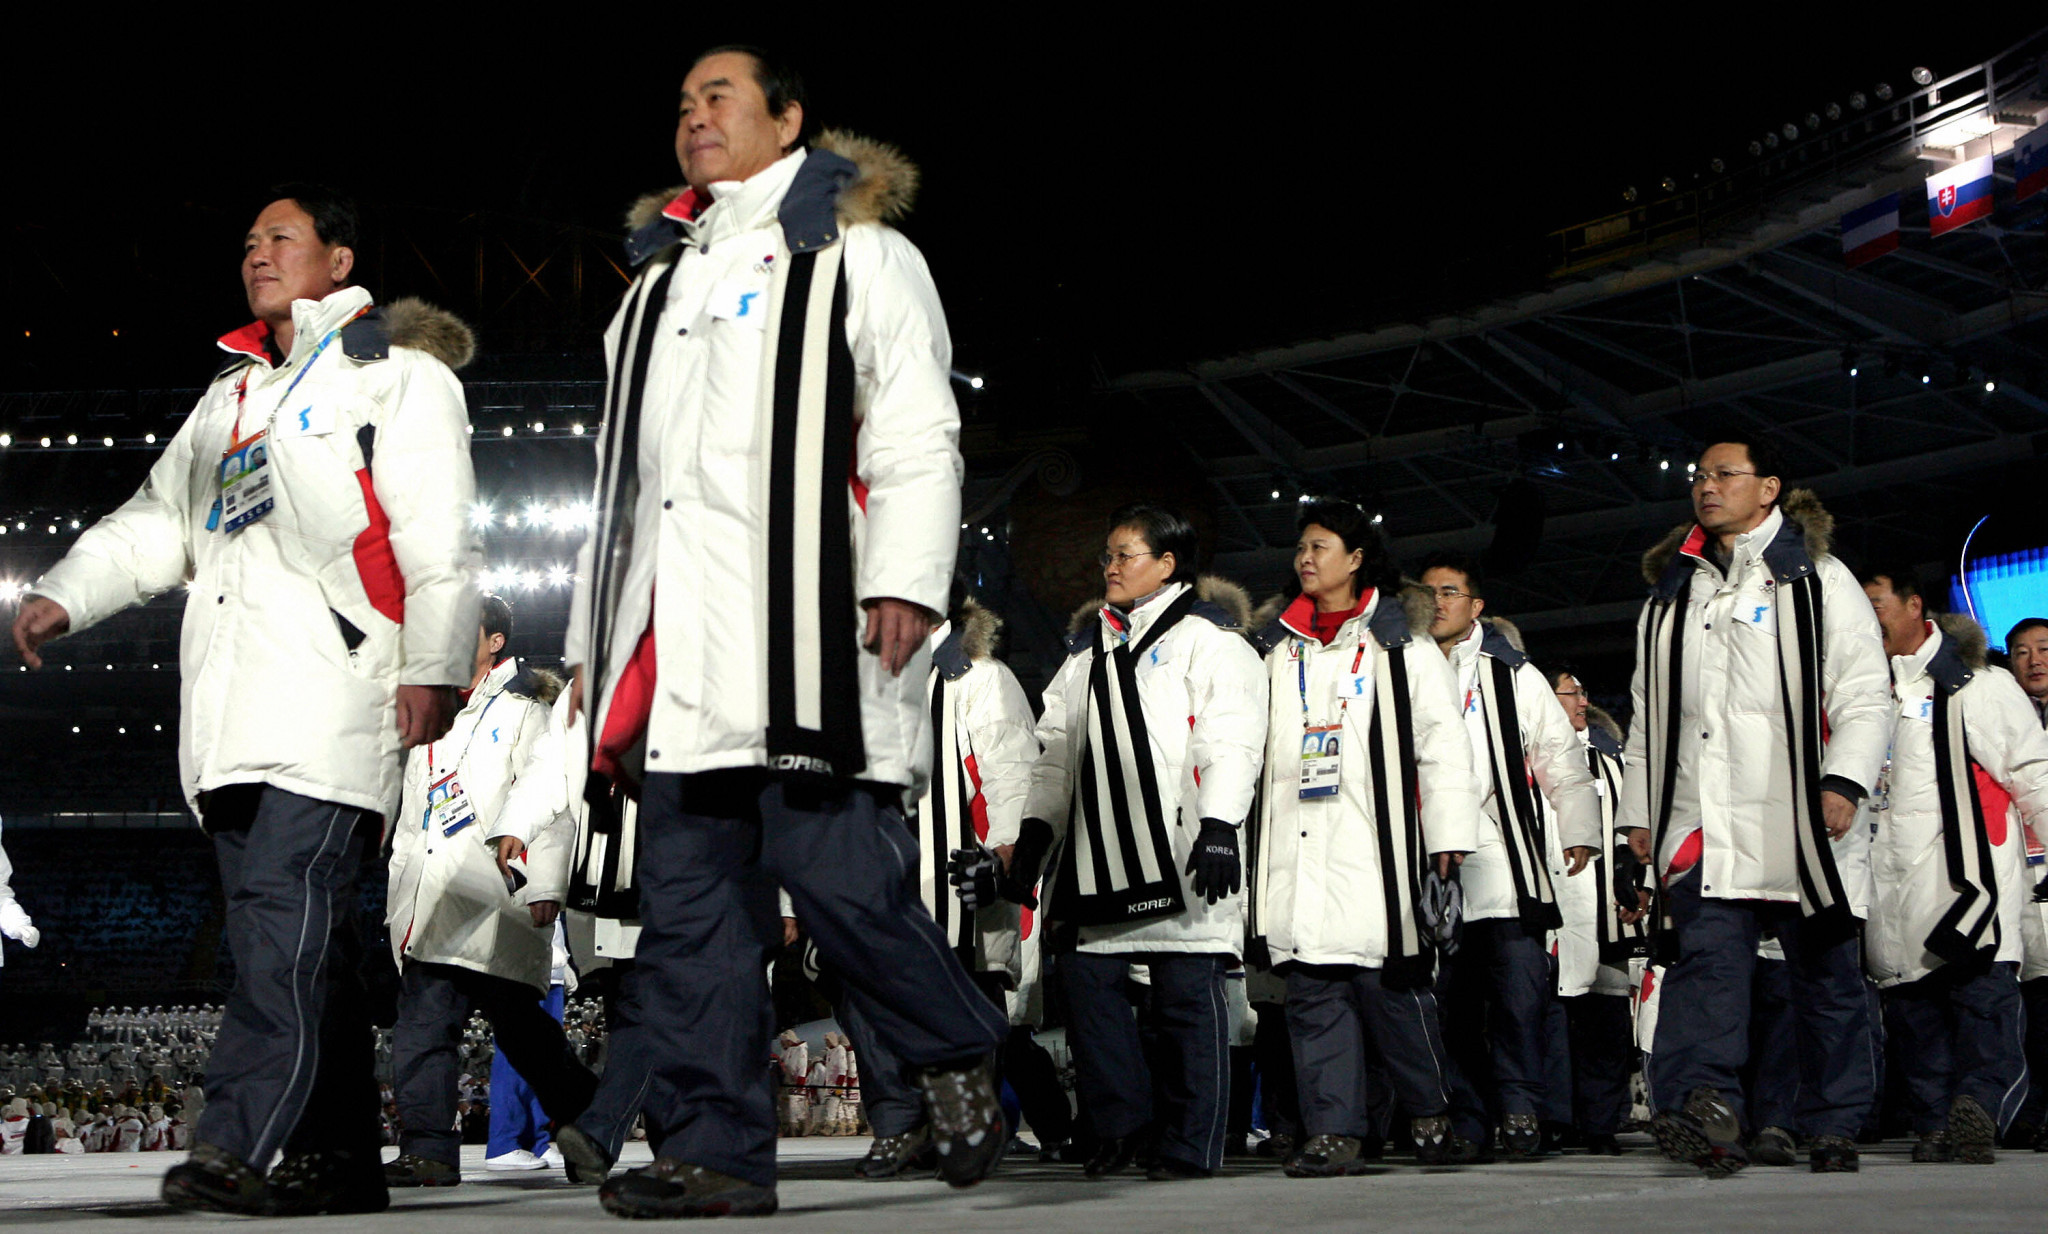 The two Koreas last marched together at an international event at the 2006 Winter Olympics in Turin ©Getty Images